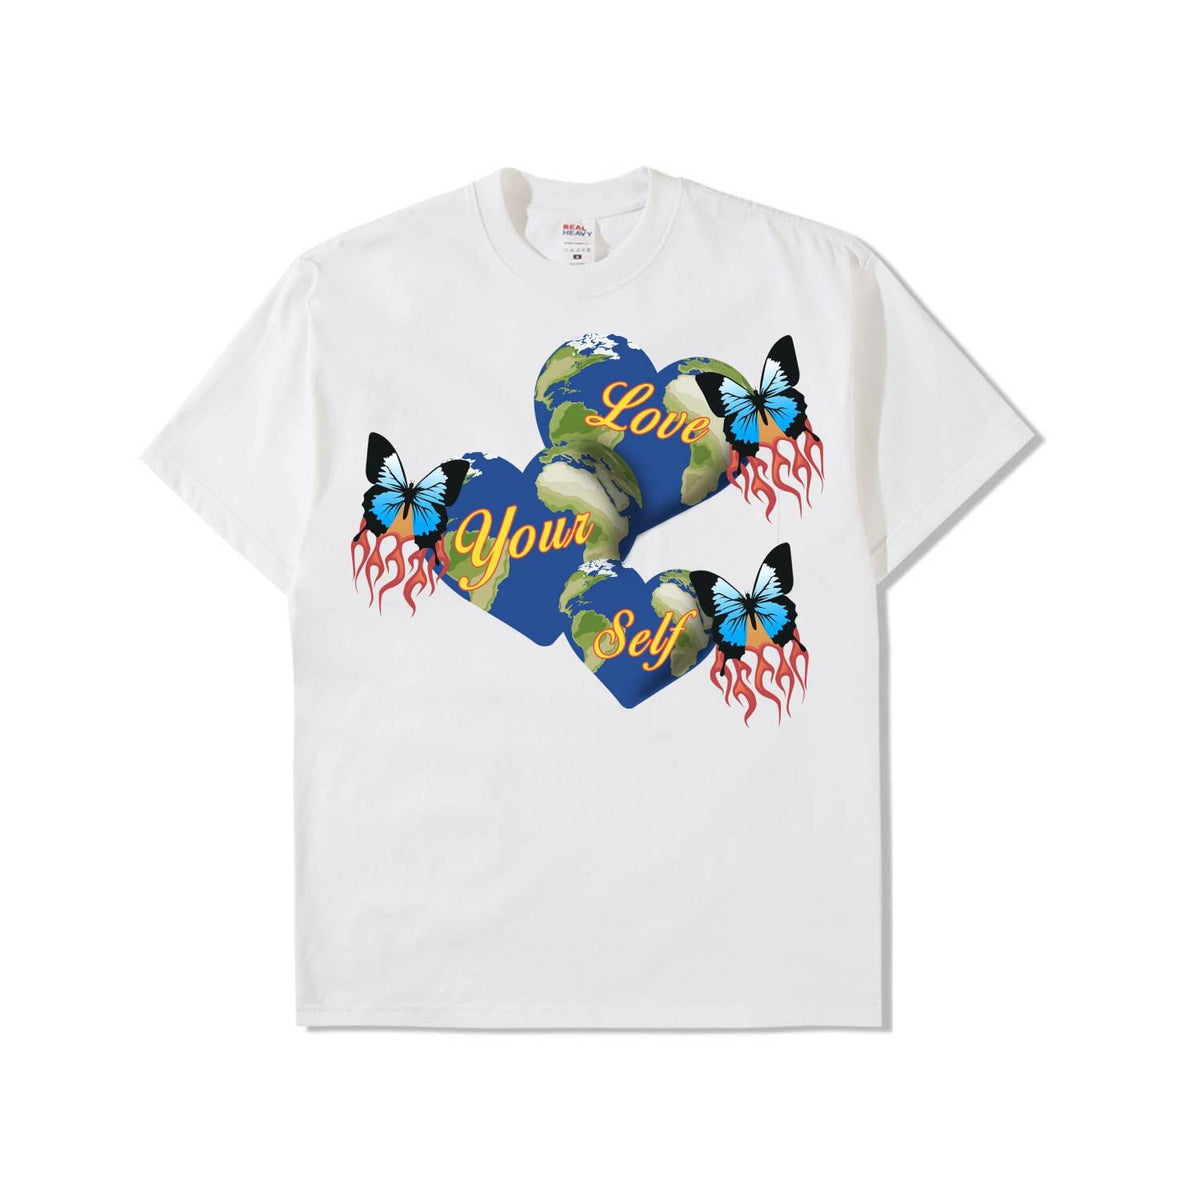 LOVE WORLD TEE - WHITE SHIRT Yours Truly Clothing